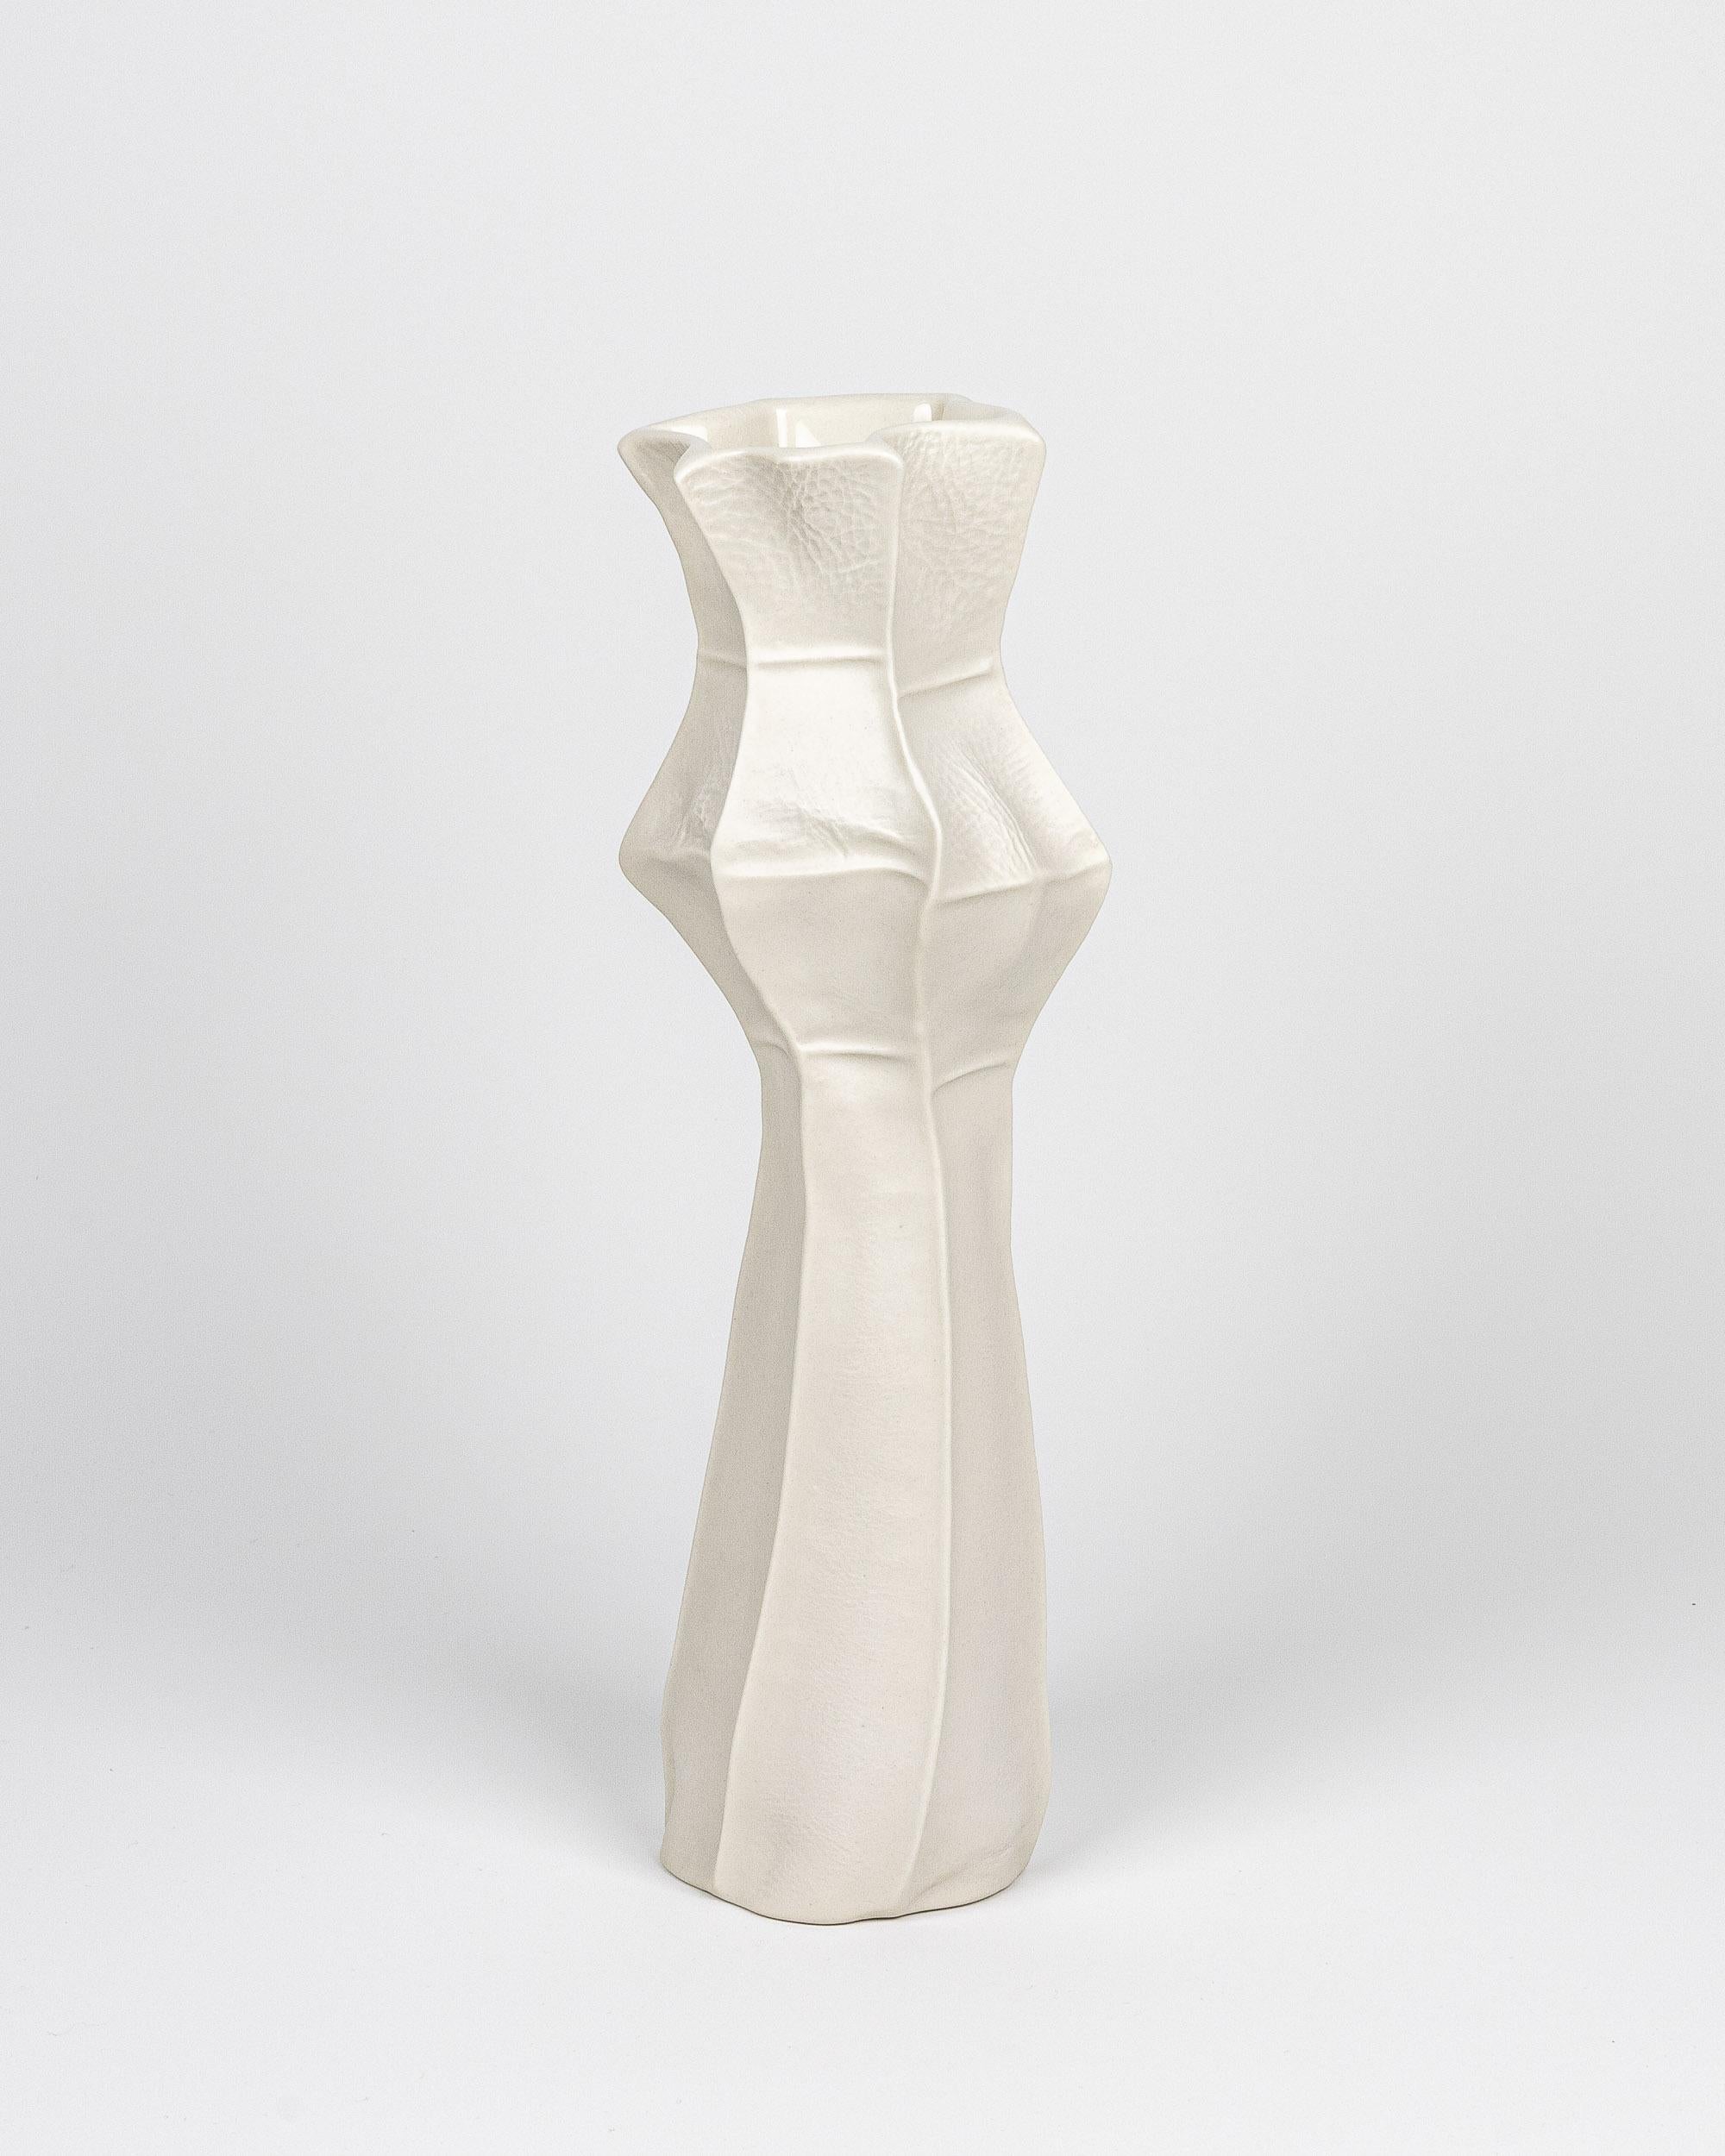 Pair of Tall White Ceramic Kawa Vases, Leather cast Porcelain, Organic In New Condition For Sale In Brooklyn, NY